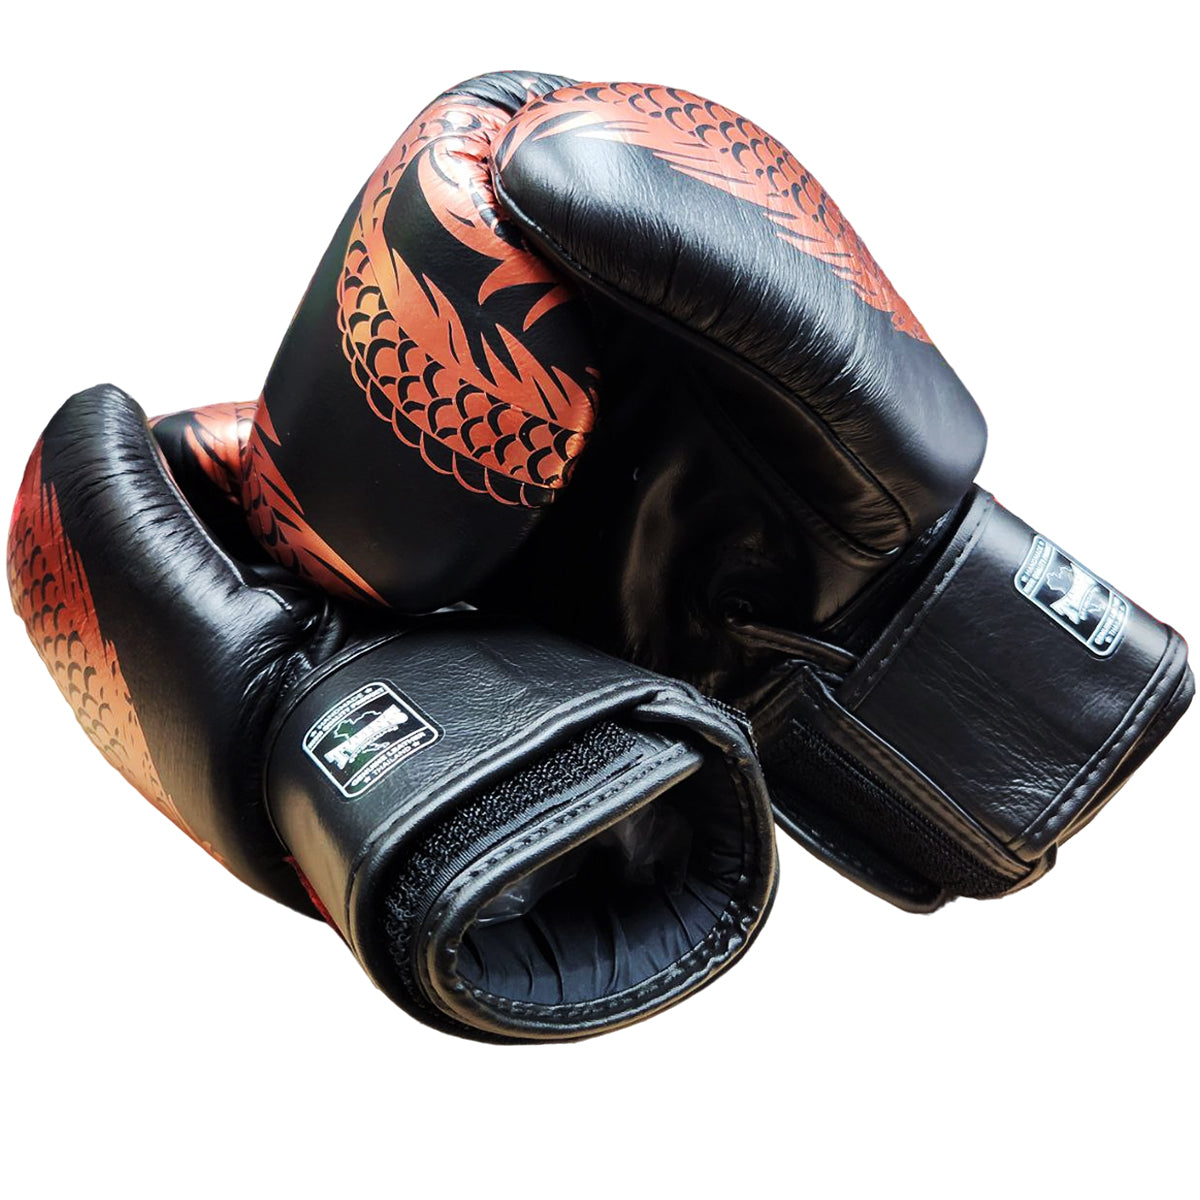 Boxing Gloves Twins Special FBGV-49 Copper Black Fancy